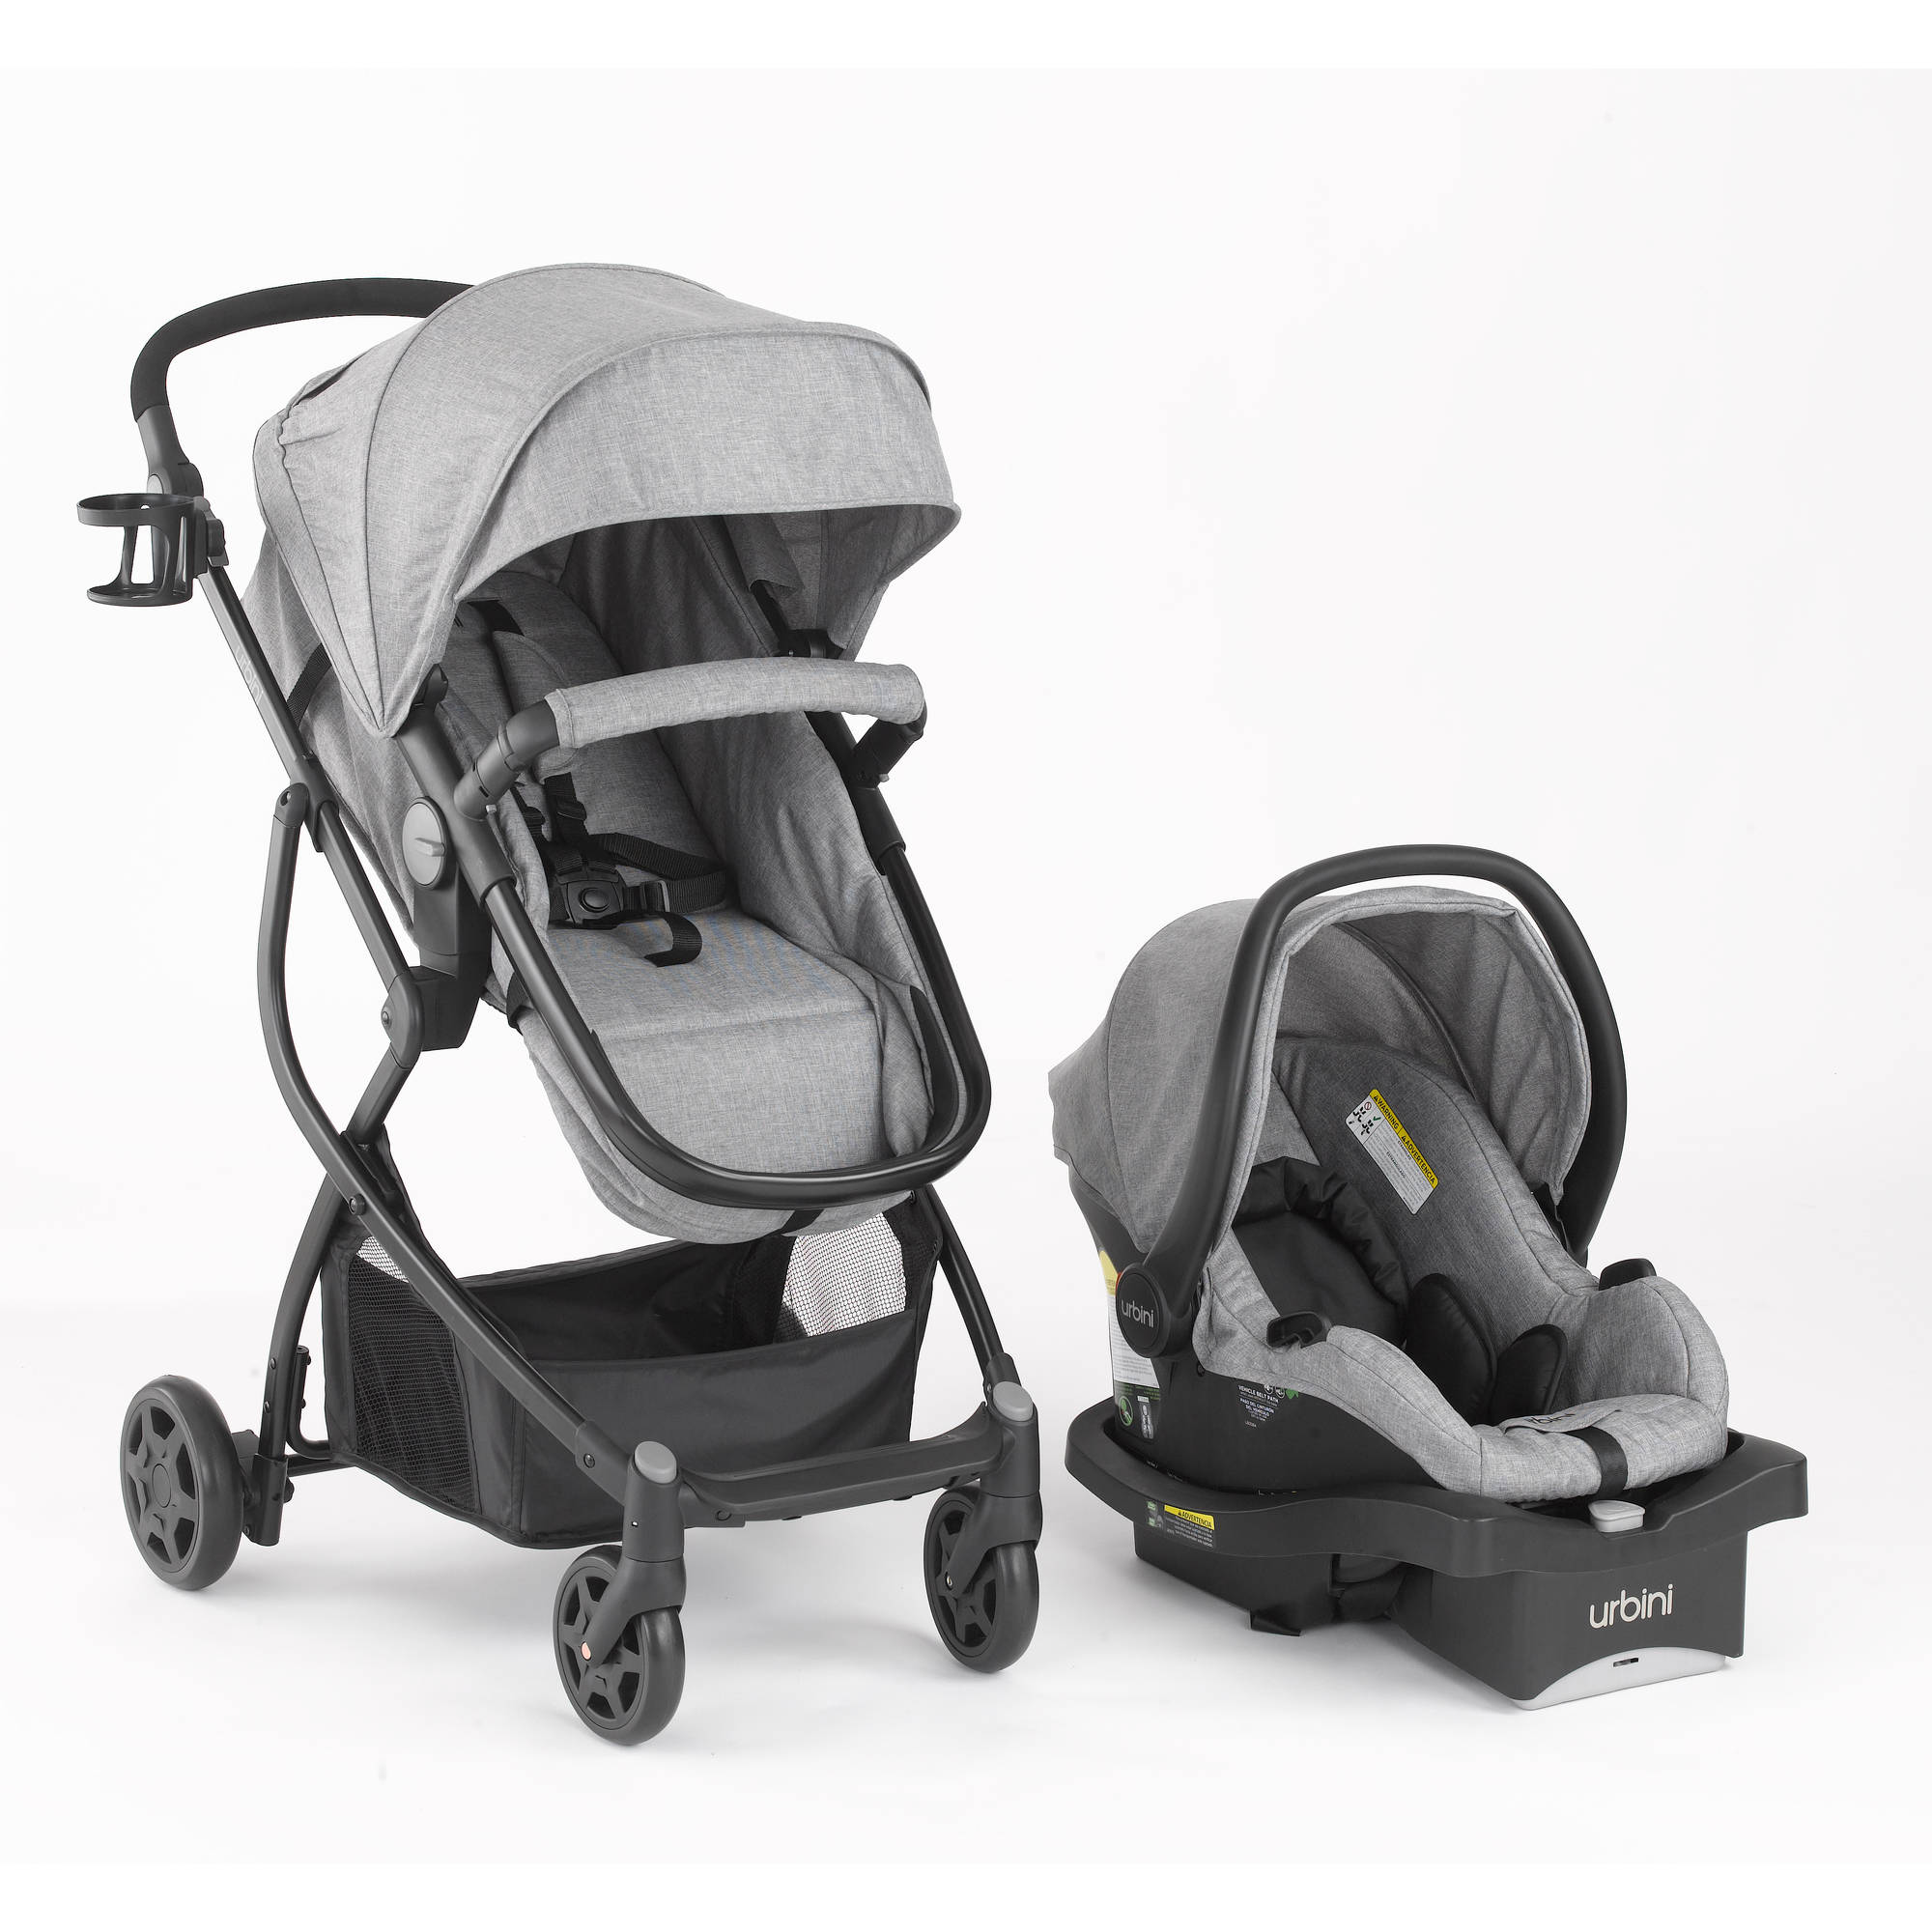 Urbini Omni Plus 3 in 1 Travel System, Special Edition, Heather Grey - image 1 of 4